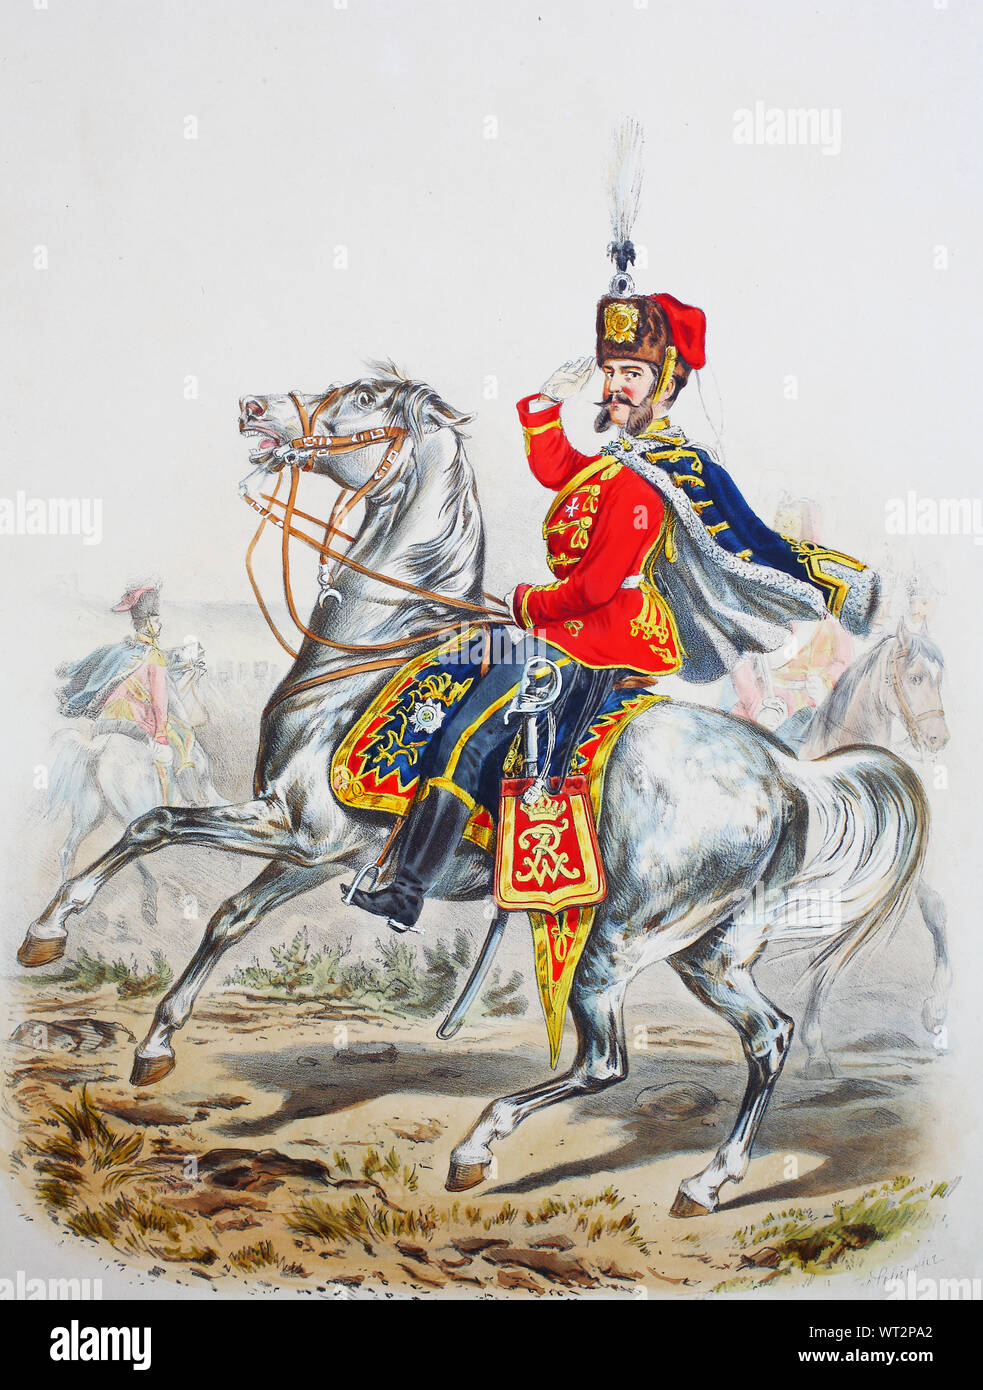 Royal Prussian Army, Guards Corps, Preußens Heer, preussische Garde, Garde Husaren Regiment, Offizier, Digital improved reproduction of an illustration from the 19th century Stock Photo